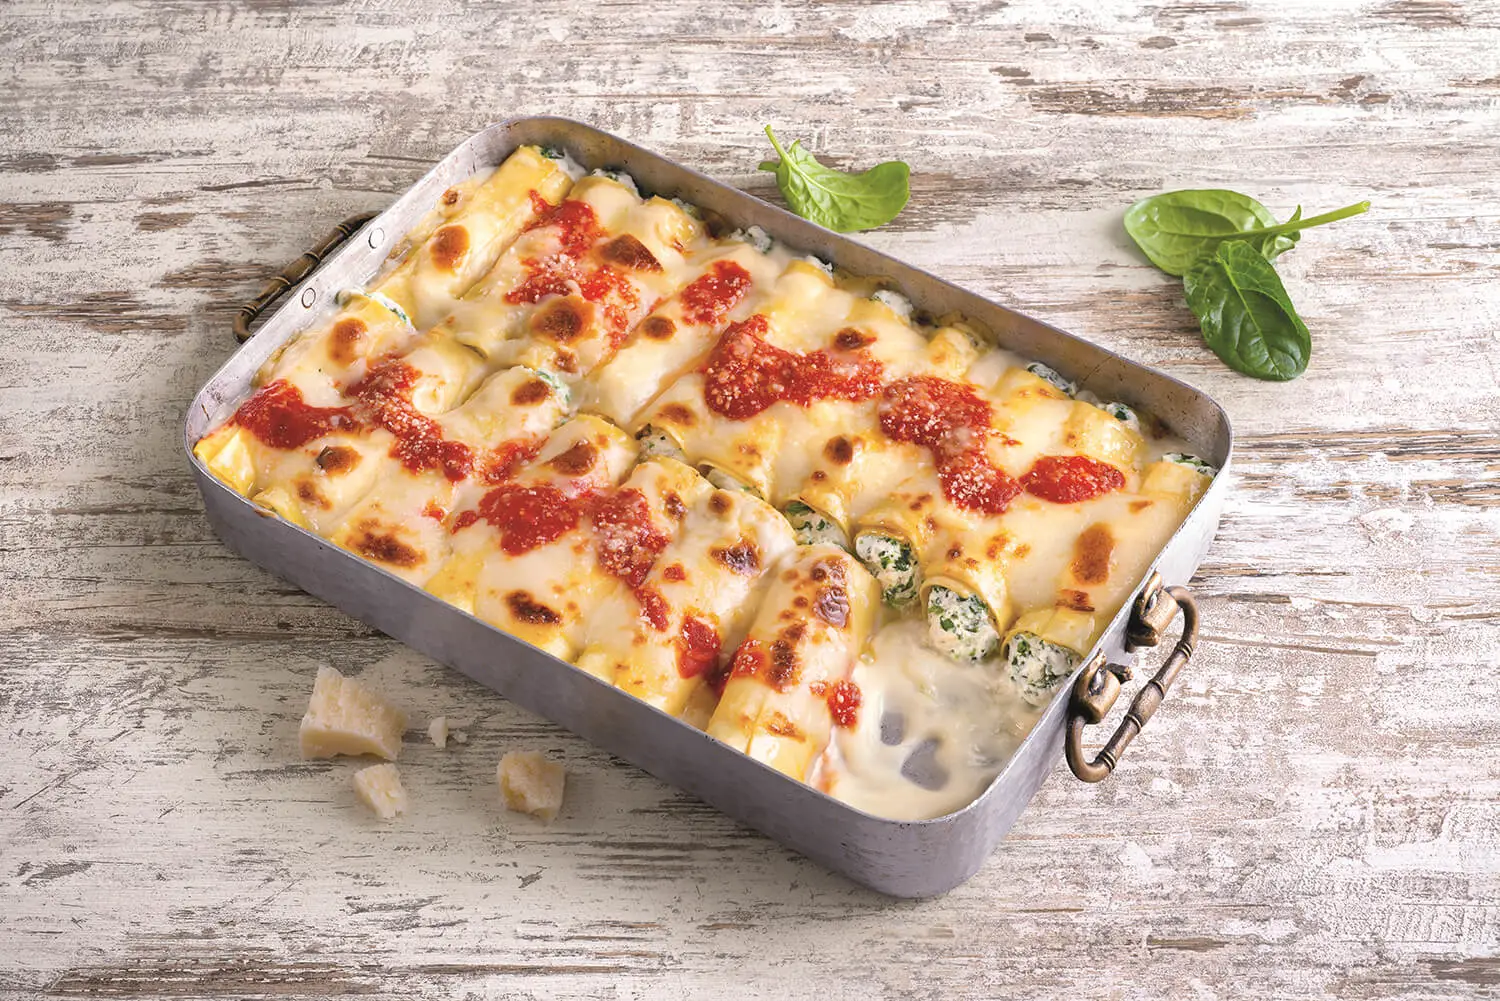 Sunday-style Cannelloni with ricotta cheese and spinach